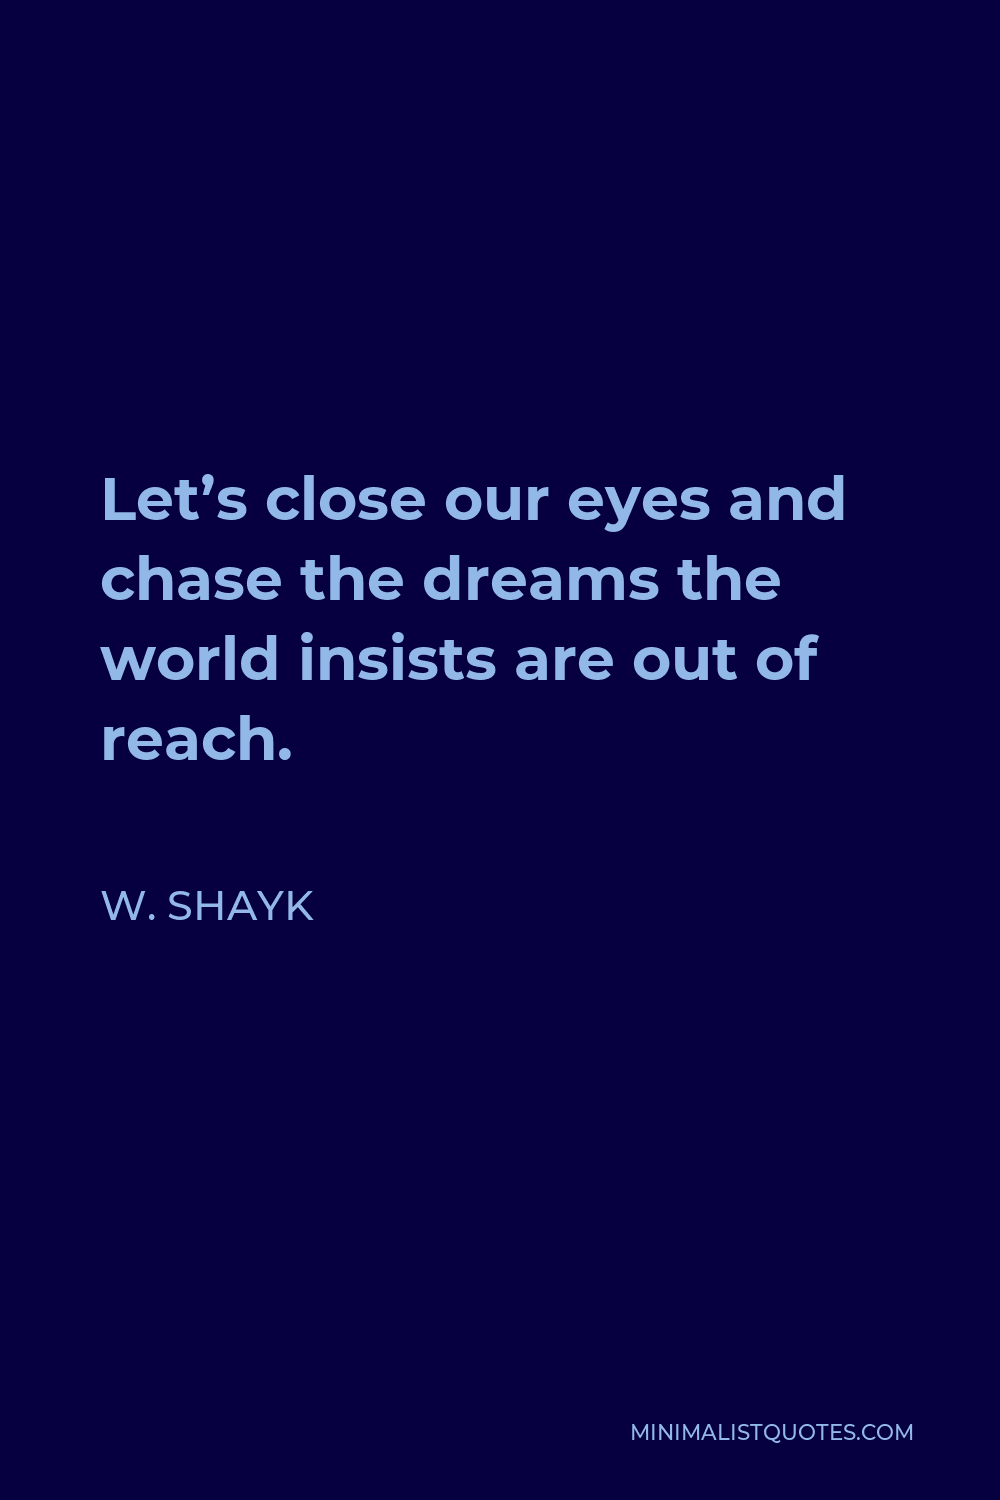 W. Shayk Quote - Let’s close our eyes and chase the dreams the world insists are out of reach.